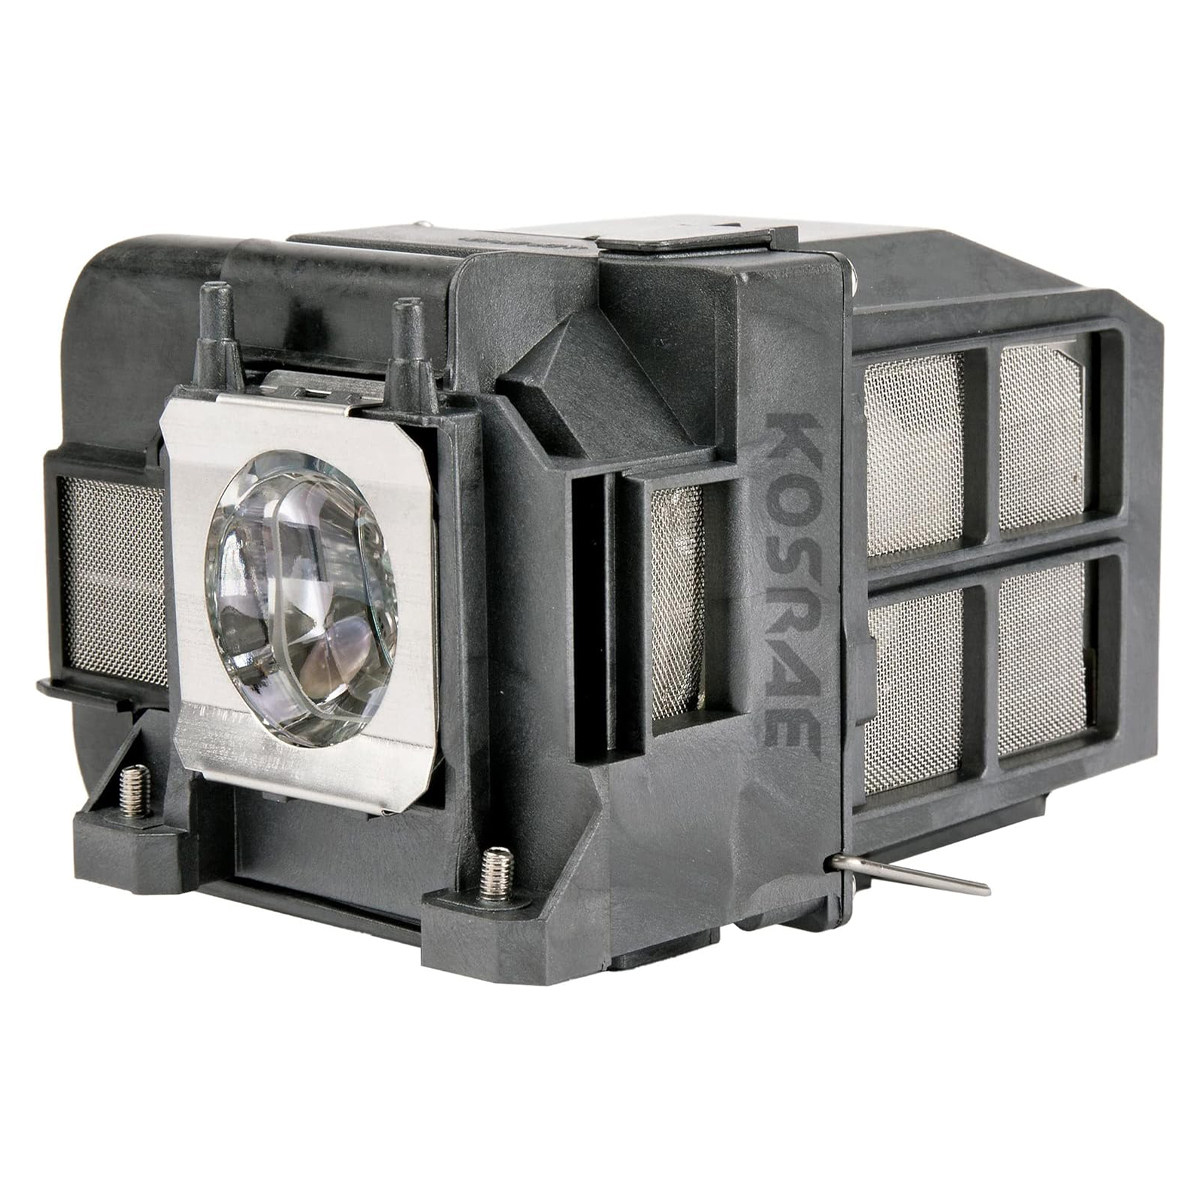 Replacement Projector lamp ELPLP77 For Epson EB-1970W EB-1975W EB-4550 EB-4650